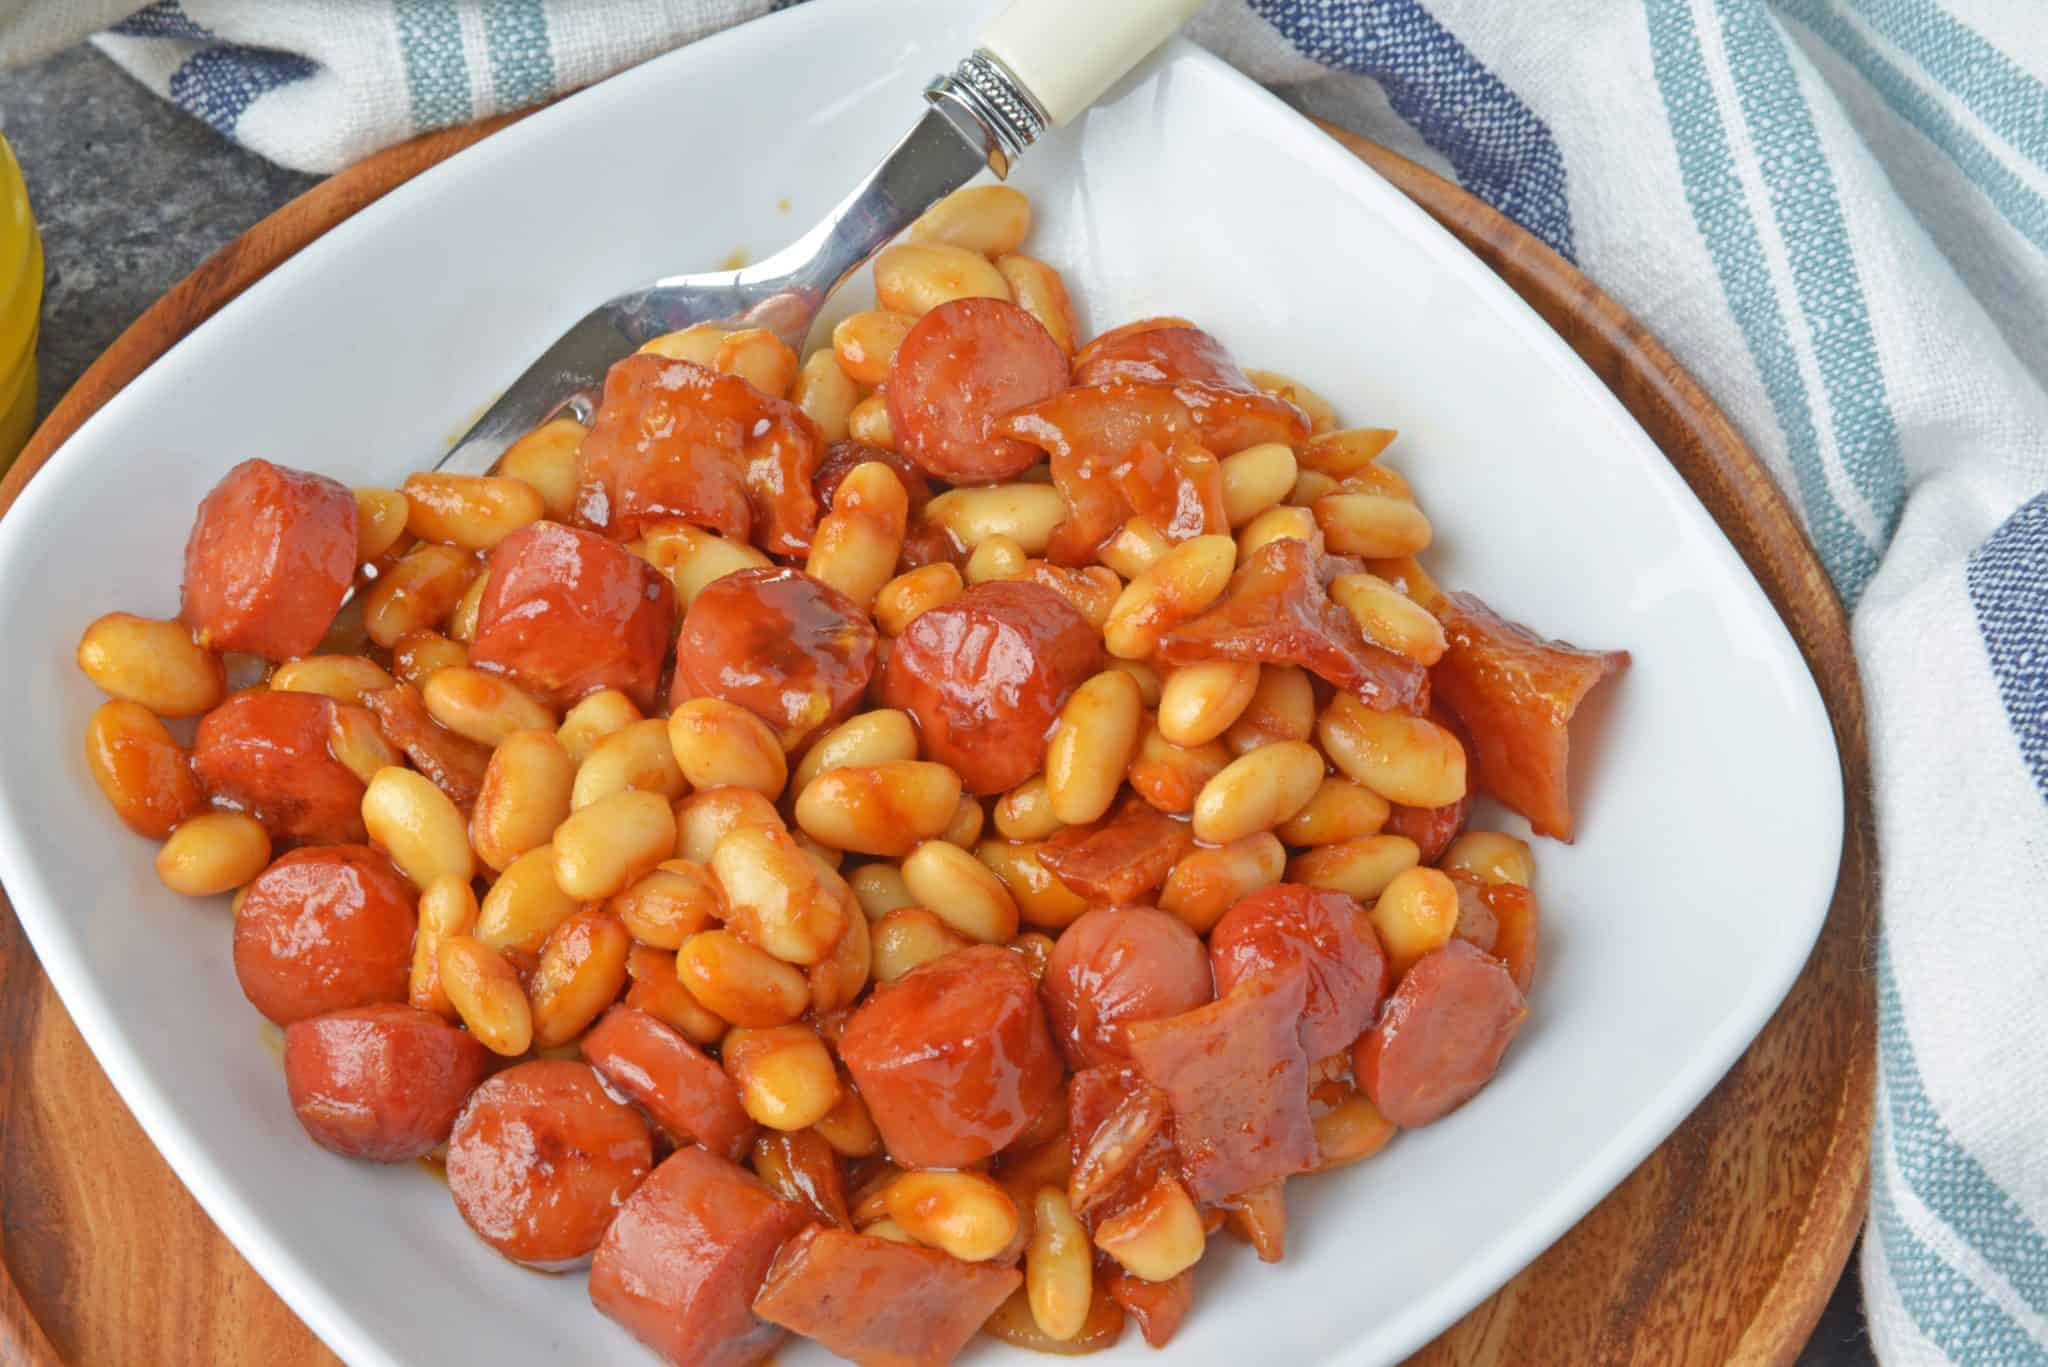 Savory Homemade Franks and Beans with Sausage